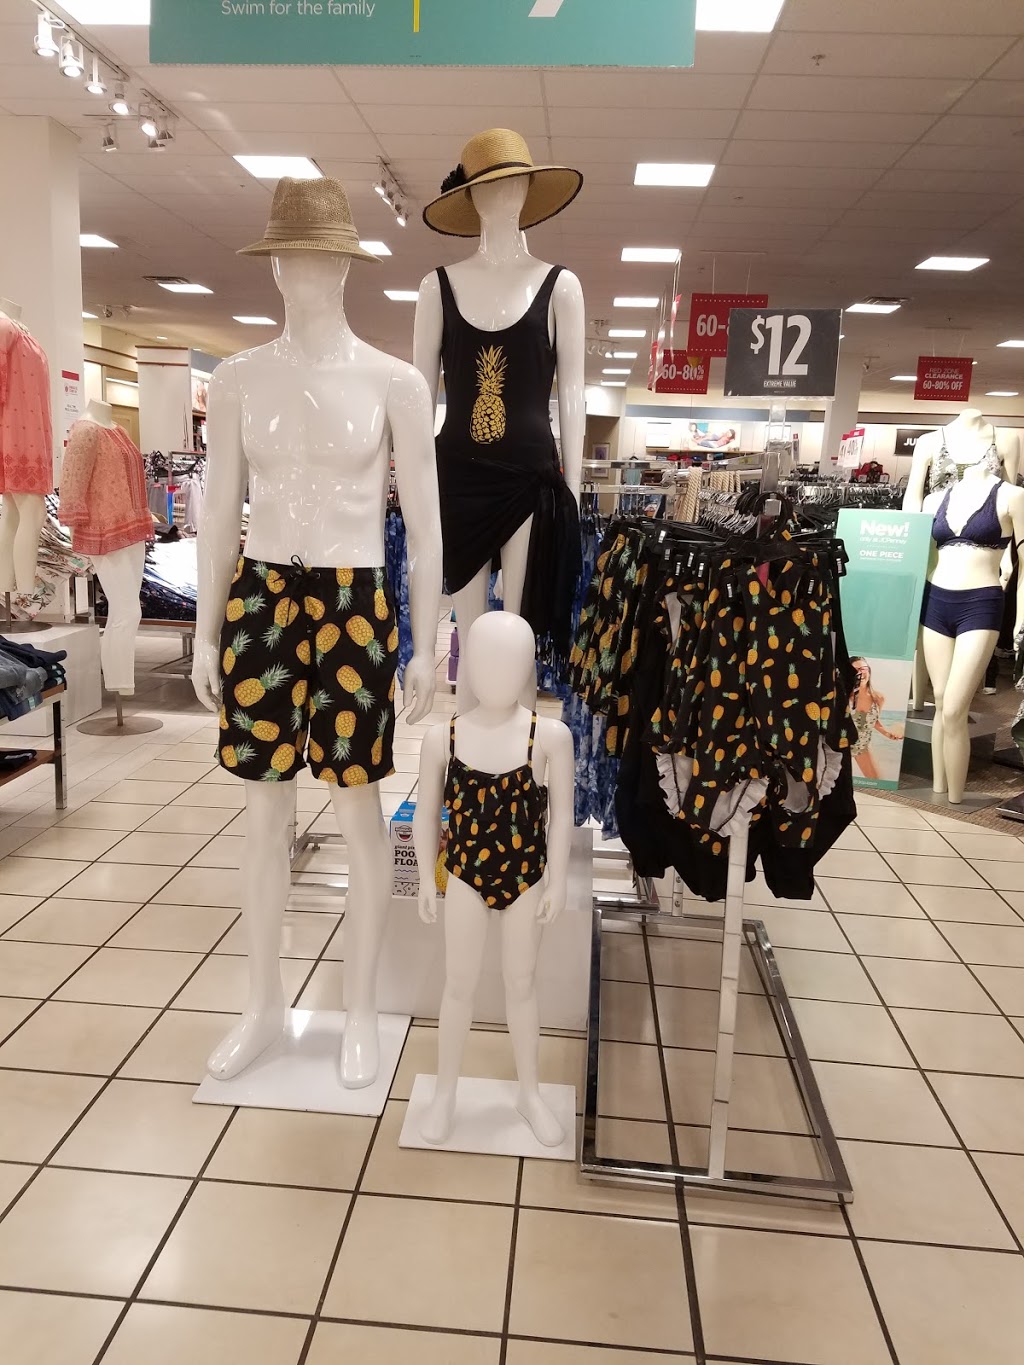 JCPenney | 3675 Stone Creek Blvd, Colerain Township, OH 45251, USA | Phone: (513) 245-9800